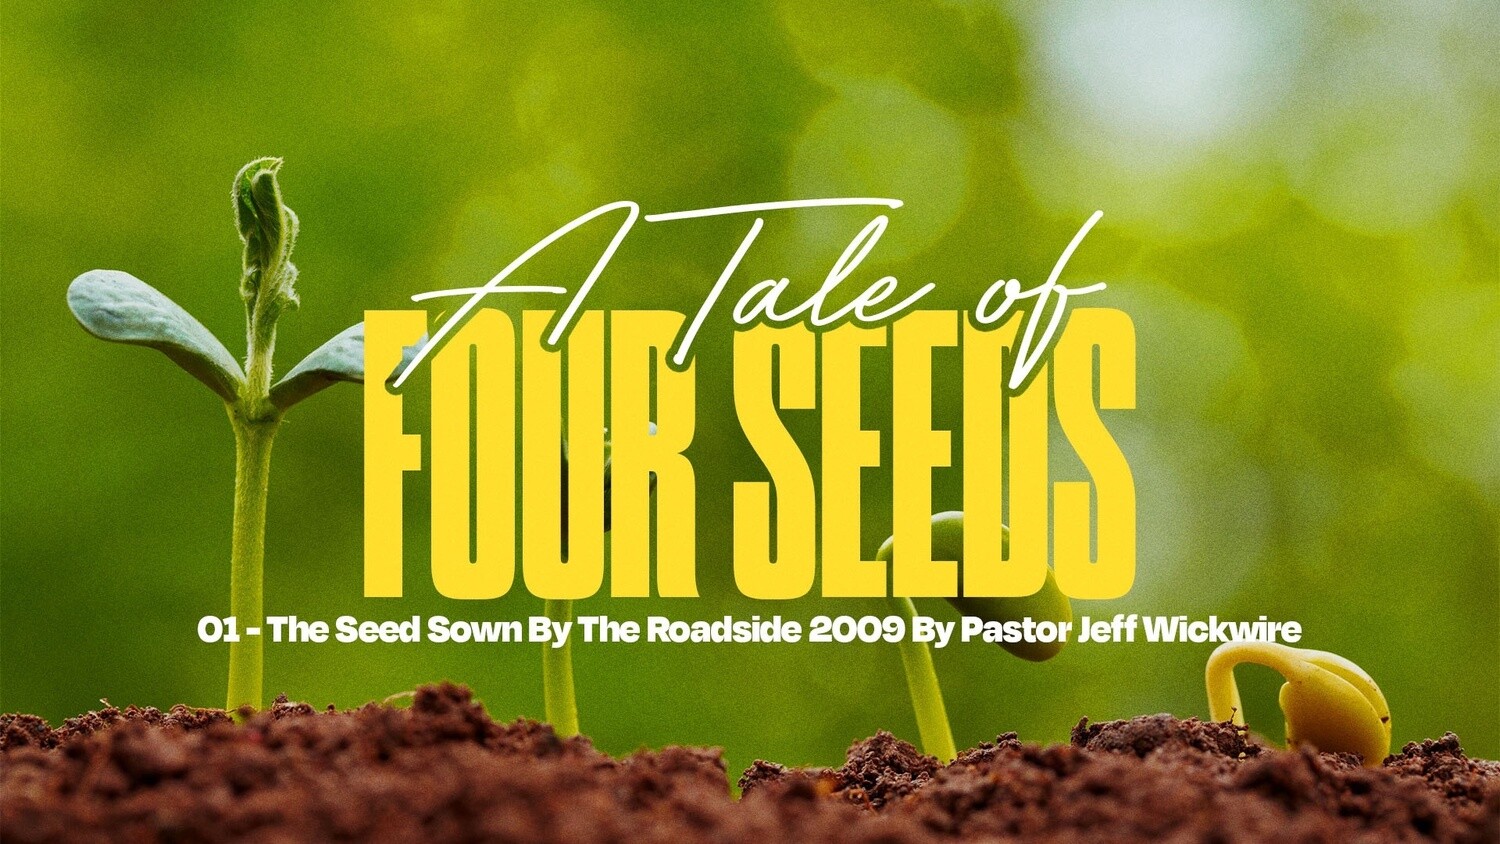 01 - The Seed Sown By The Roadside 2009 By Pastor Jeff Wickwire